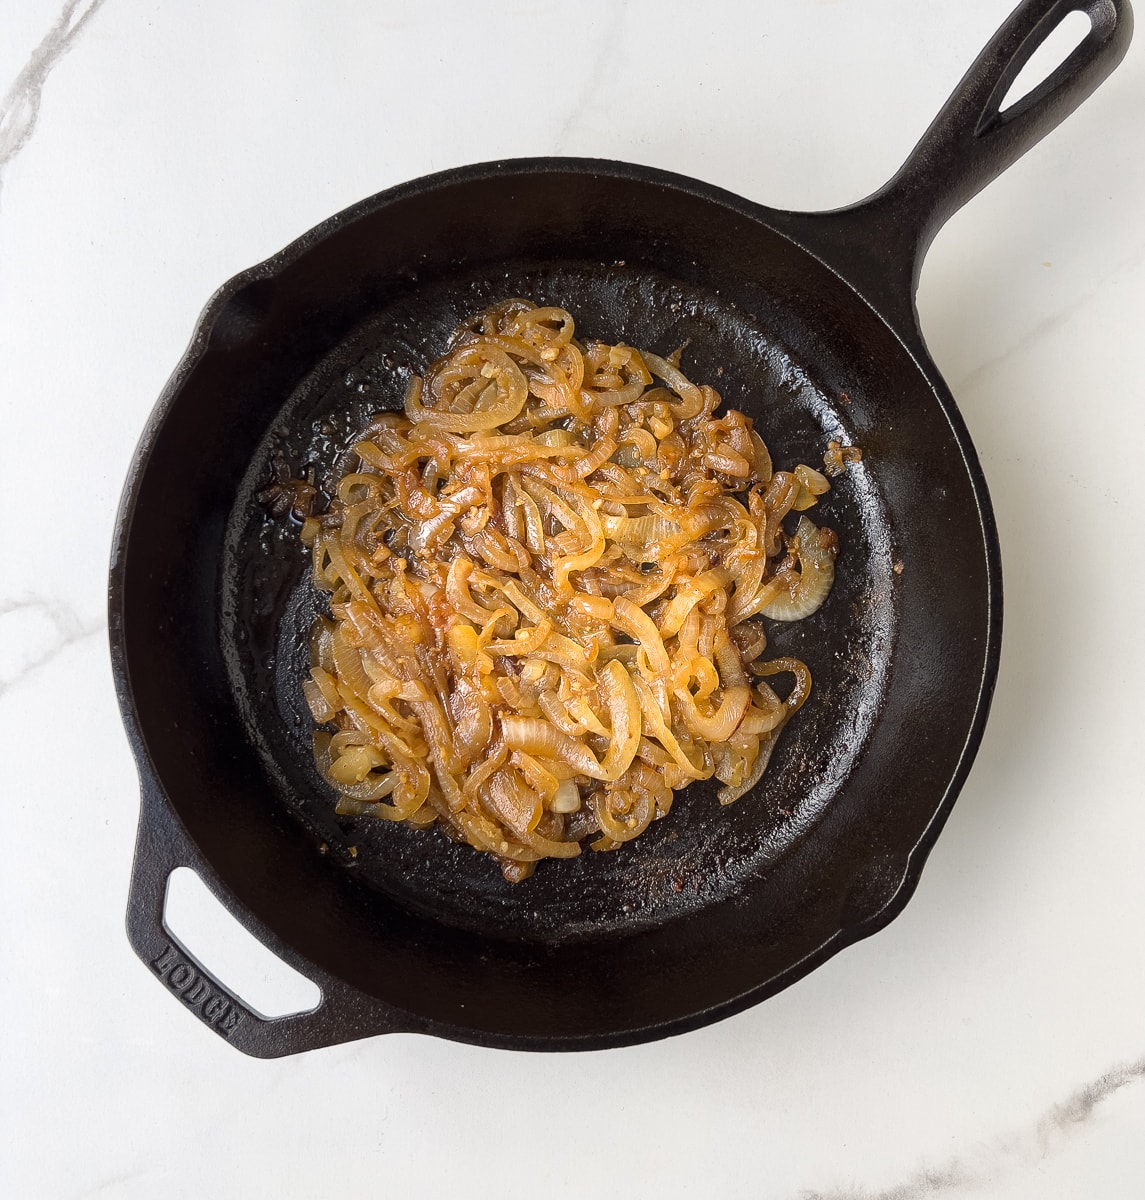 Caramelized onions in black pan.